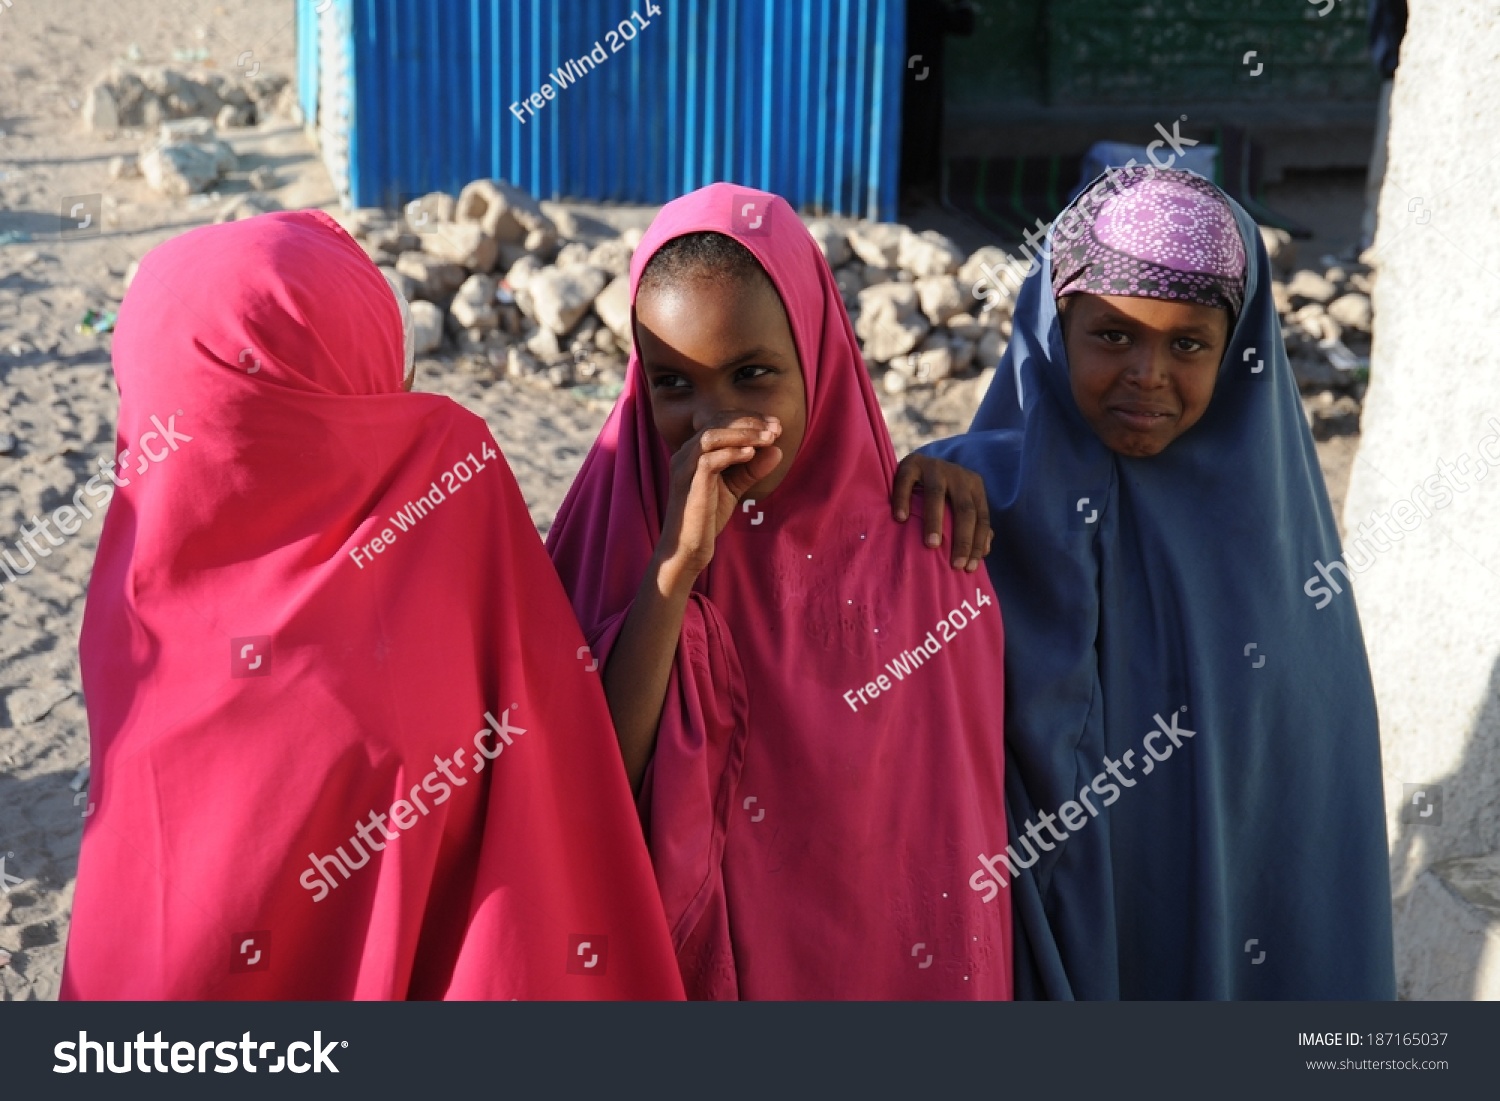 HARGEISA, SOMALIA - JANUARY 8, 2010:Unidentified Somalis in the streets of the city of Hargeysa. City in Somalia, capital of unrecognized state of Somaliland. Much of the population lives in poverty. #187165037